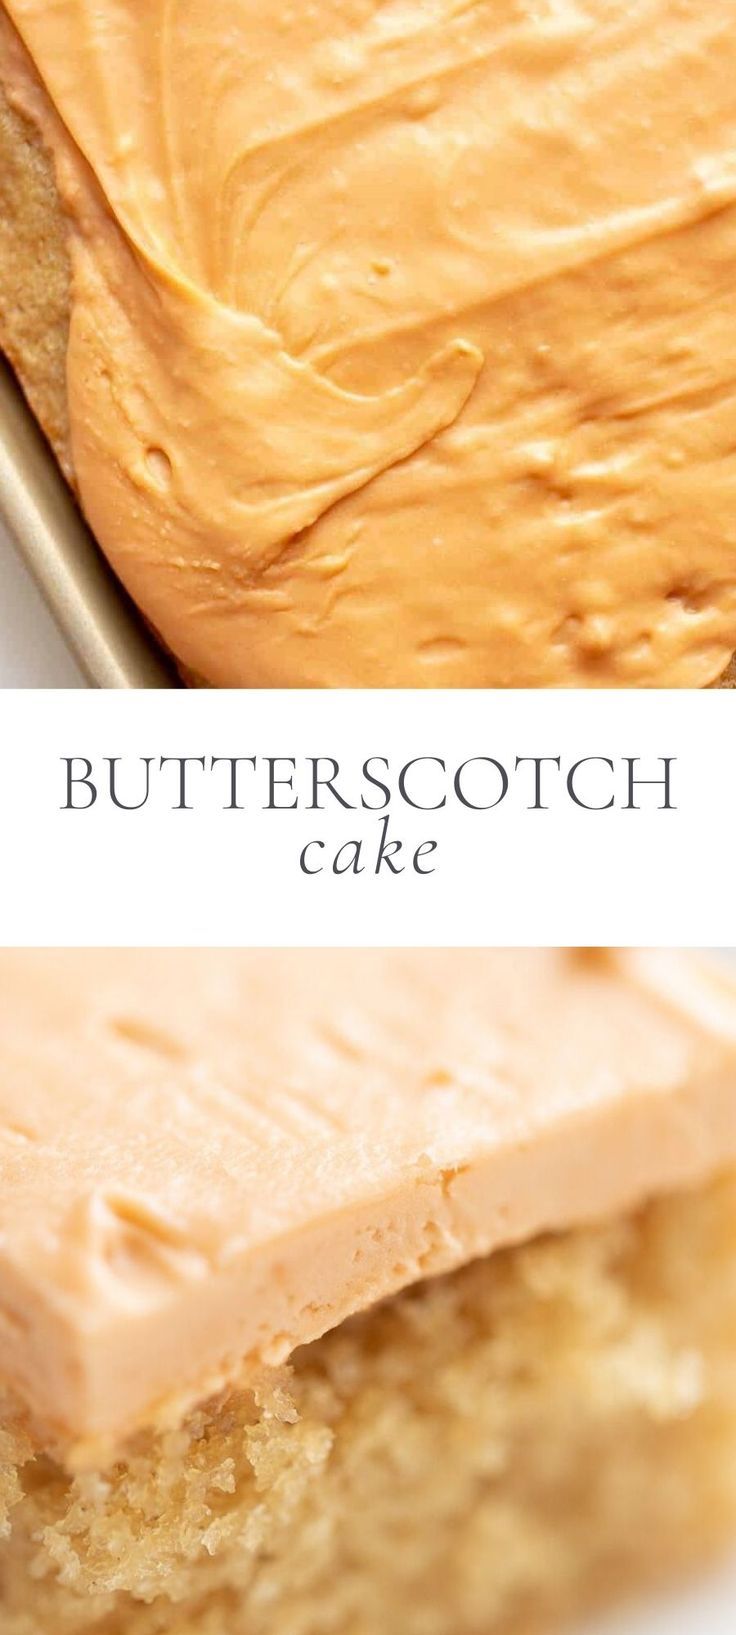 Incredible Old-Fashioned Butterscotch Cake | Julie Blanner